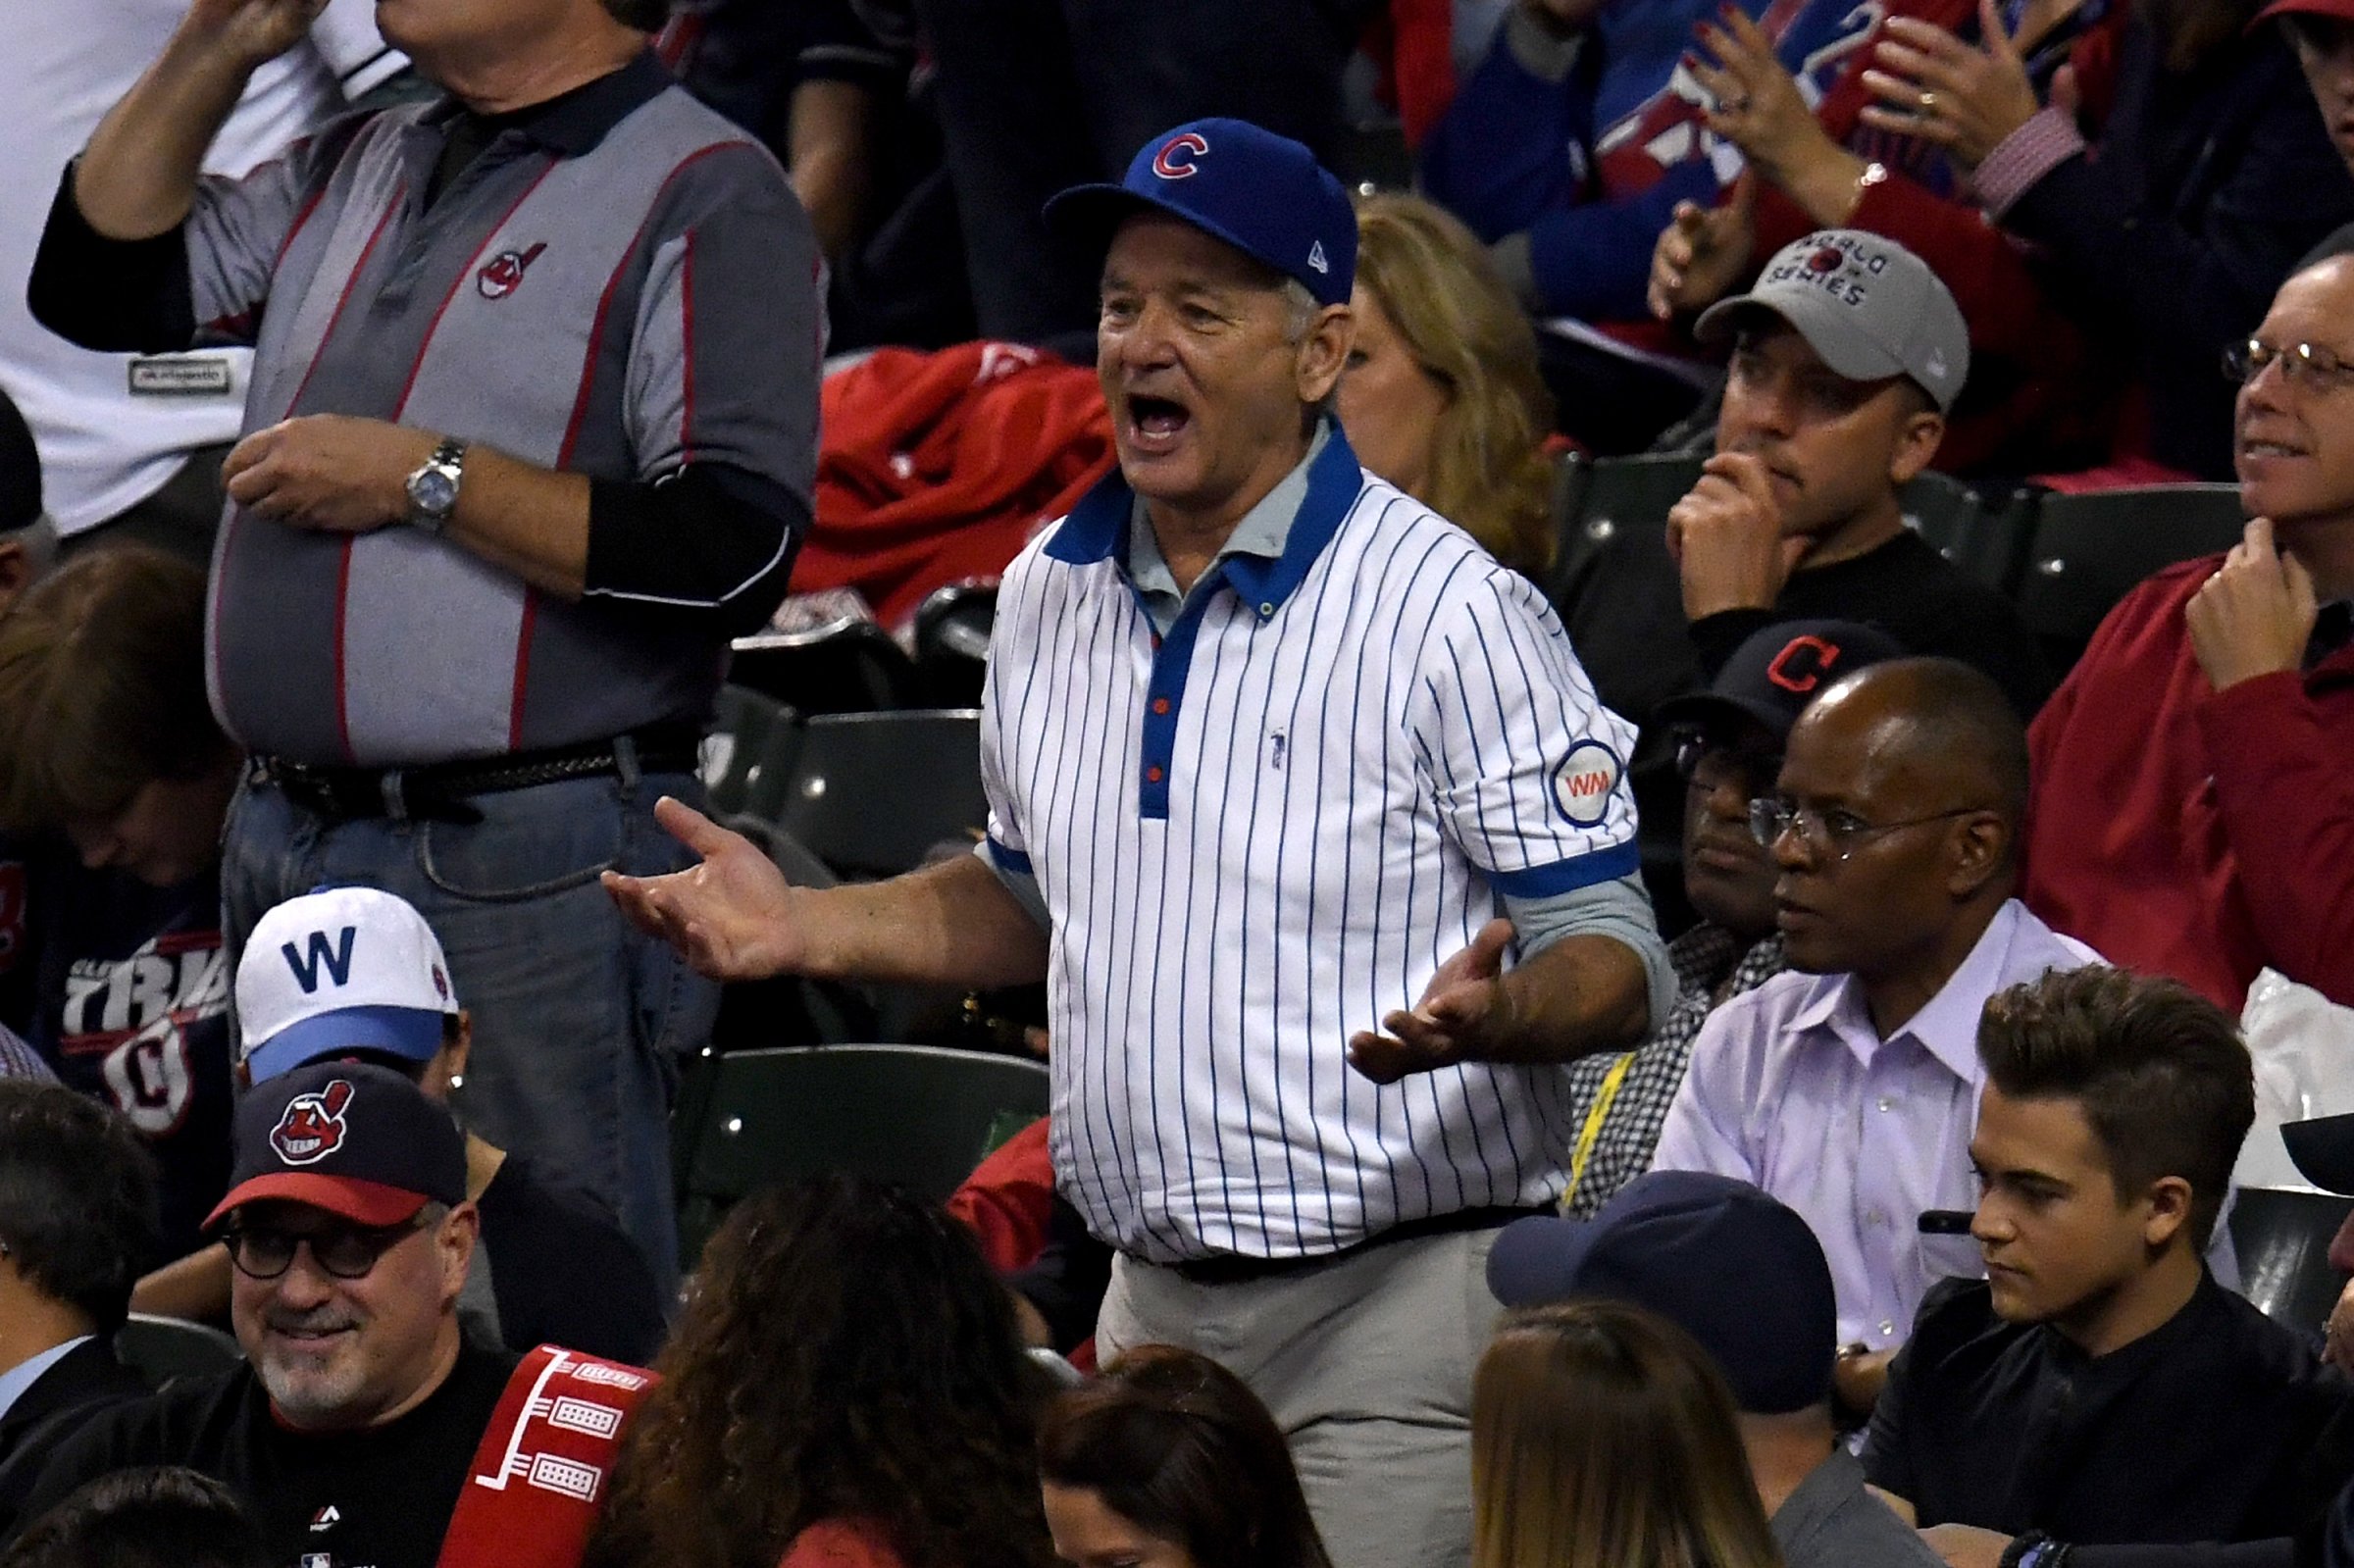 Actor Bill Murray attends Game Six of the 2016 World Series between the Chicago Cubs and the Cleveland Indians at Progressive Field on November 1, 2016 in Cleveland, Ohio.